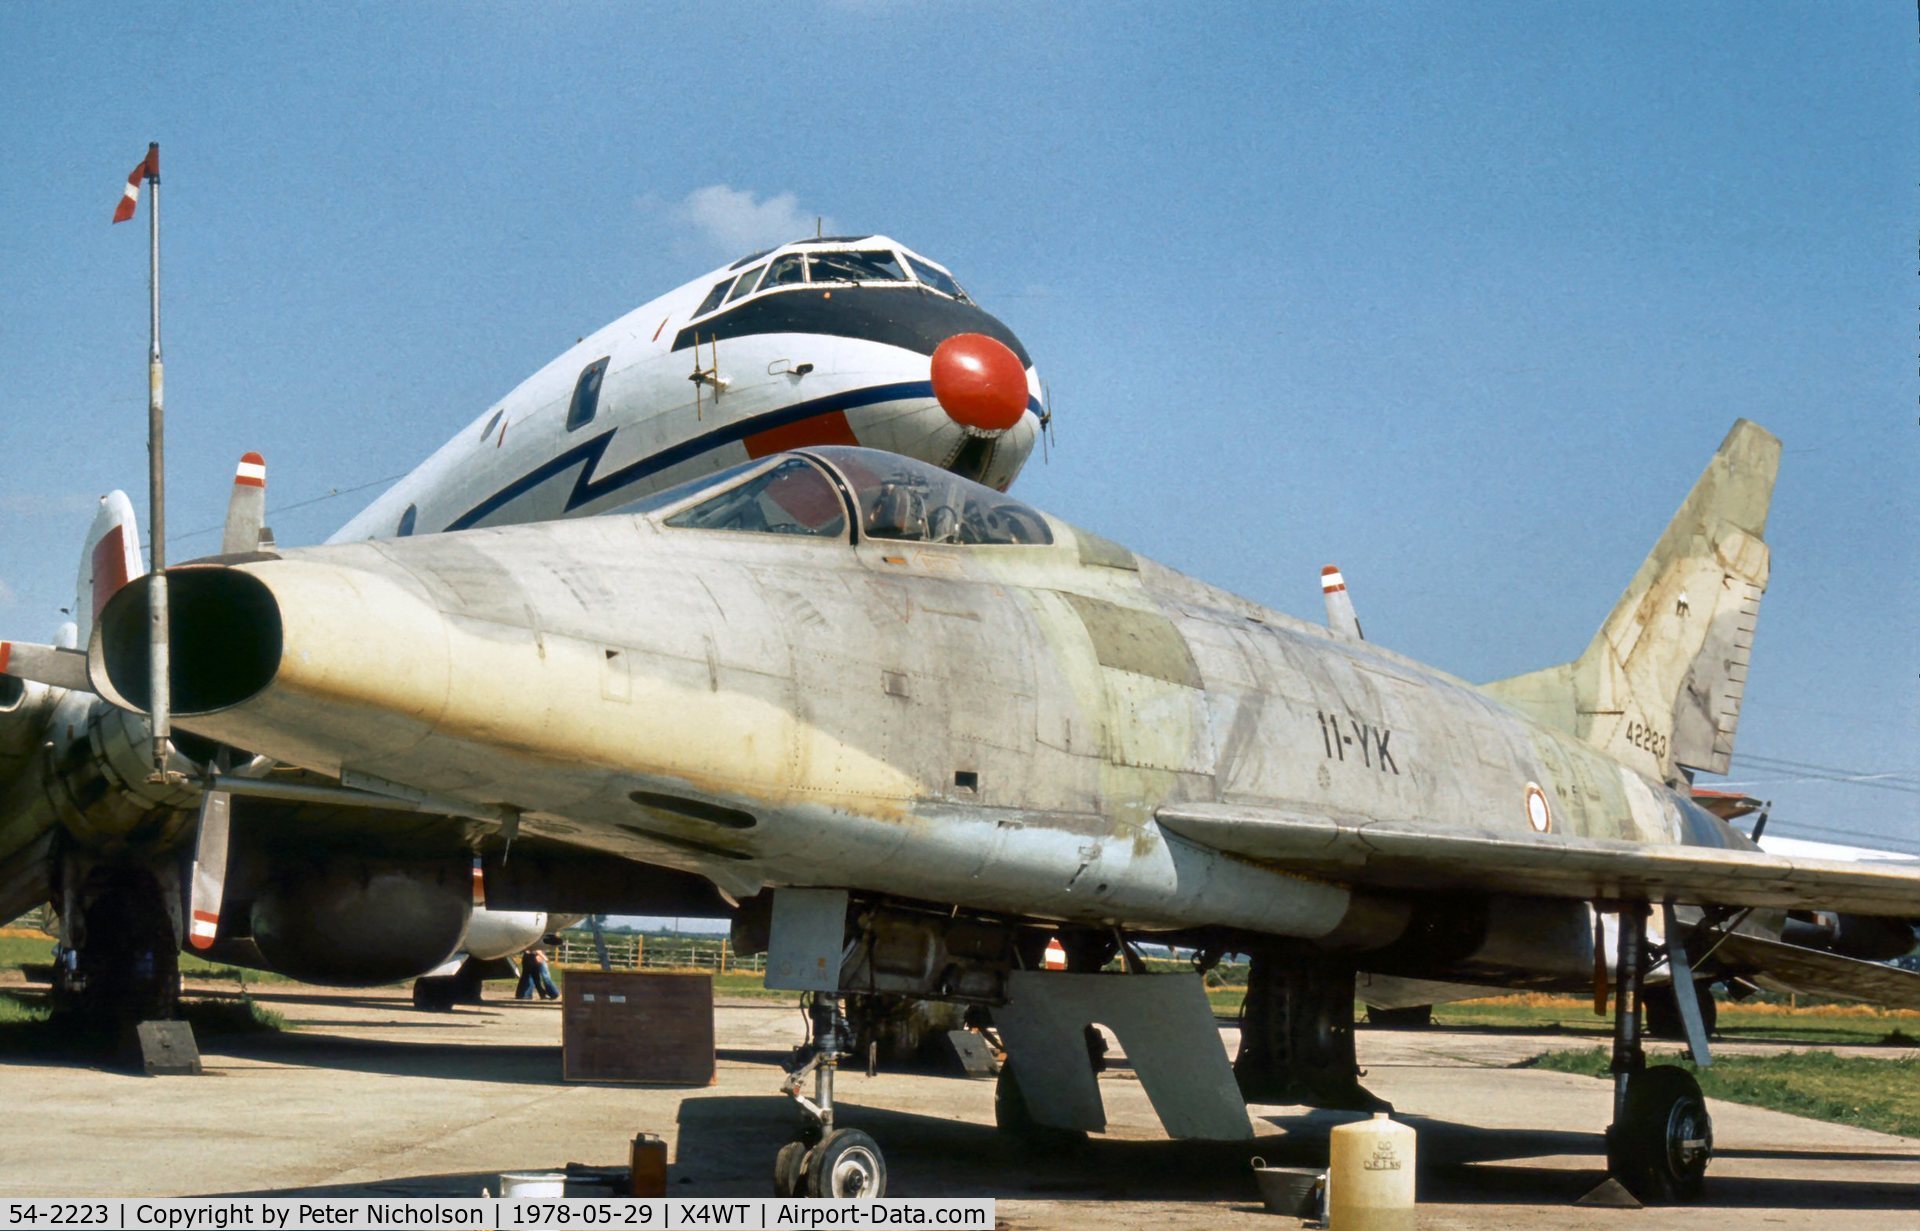 54-2223, North American F-100D Super Sabre C/N 223-103, Ex-French Air Force F-100D as seen at the Newark Air Museum in May 1978.